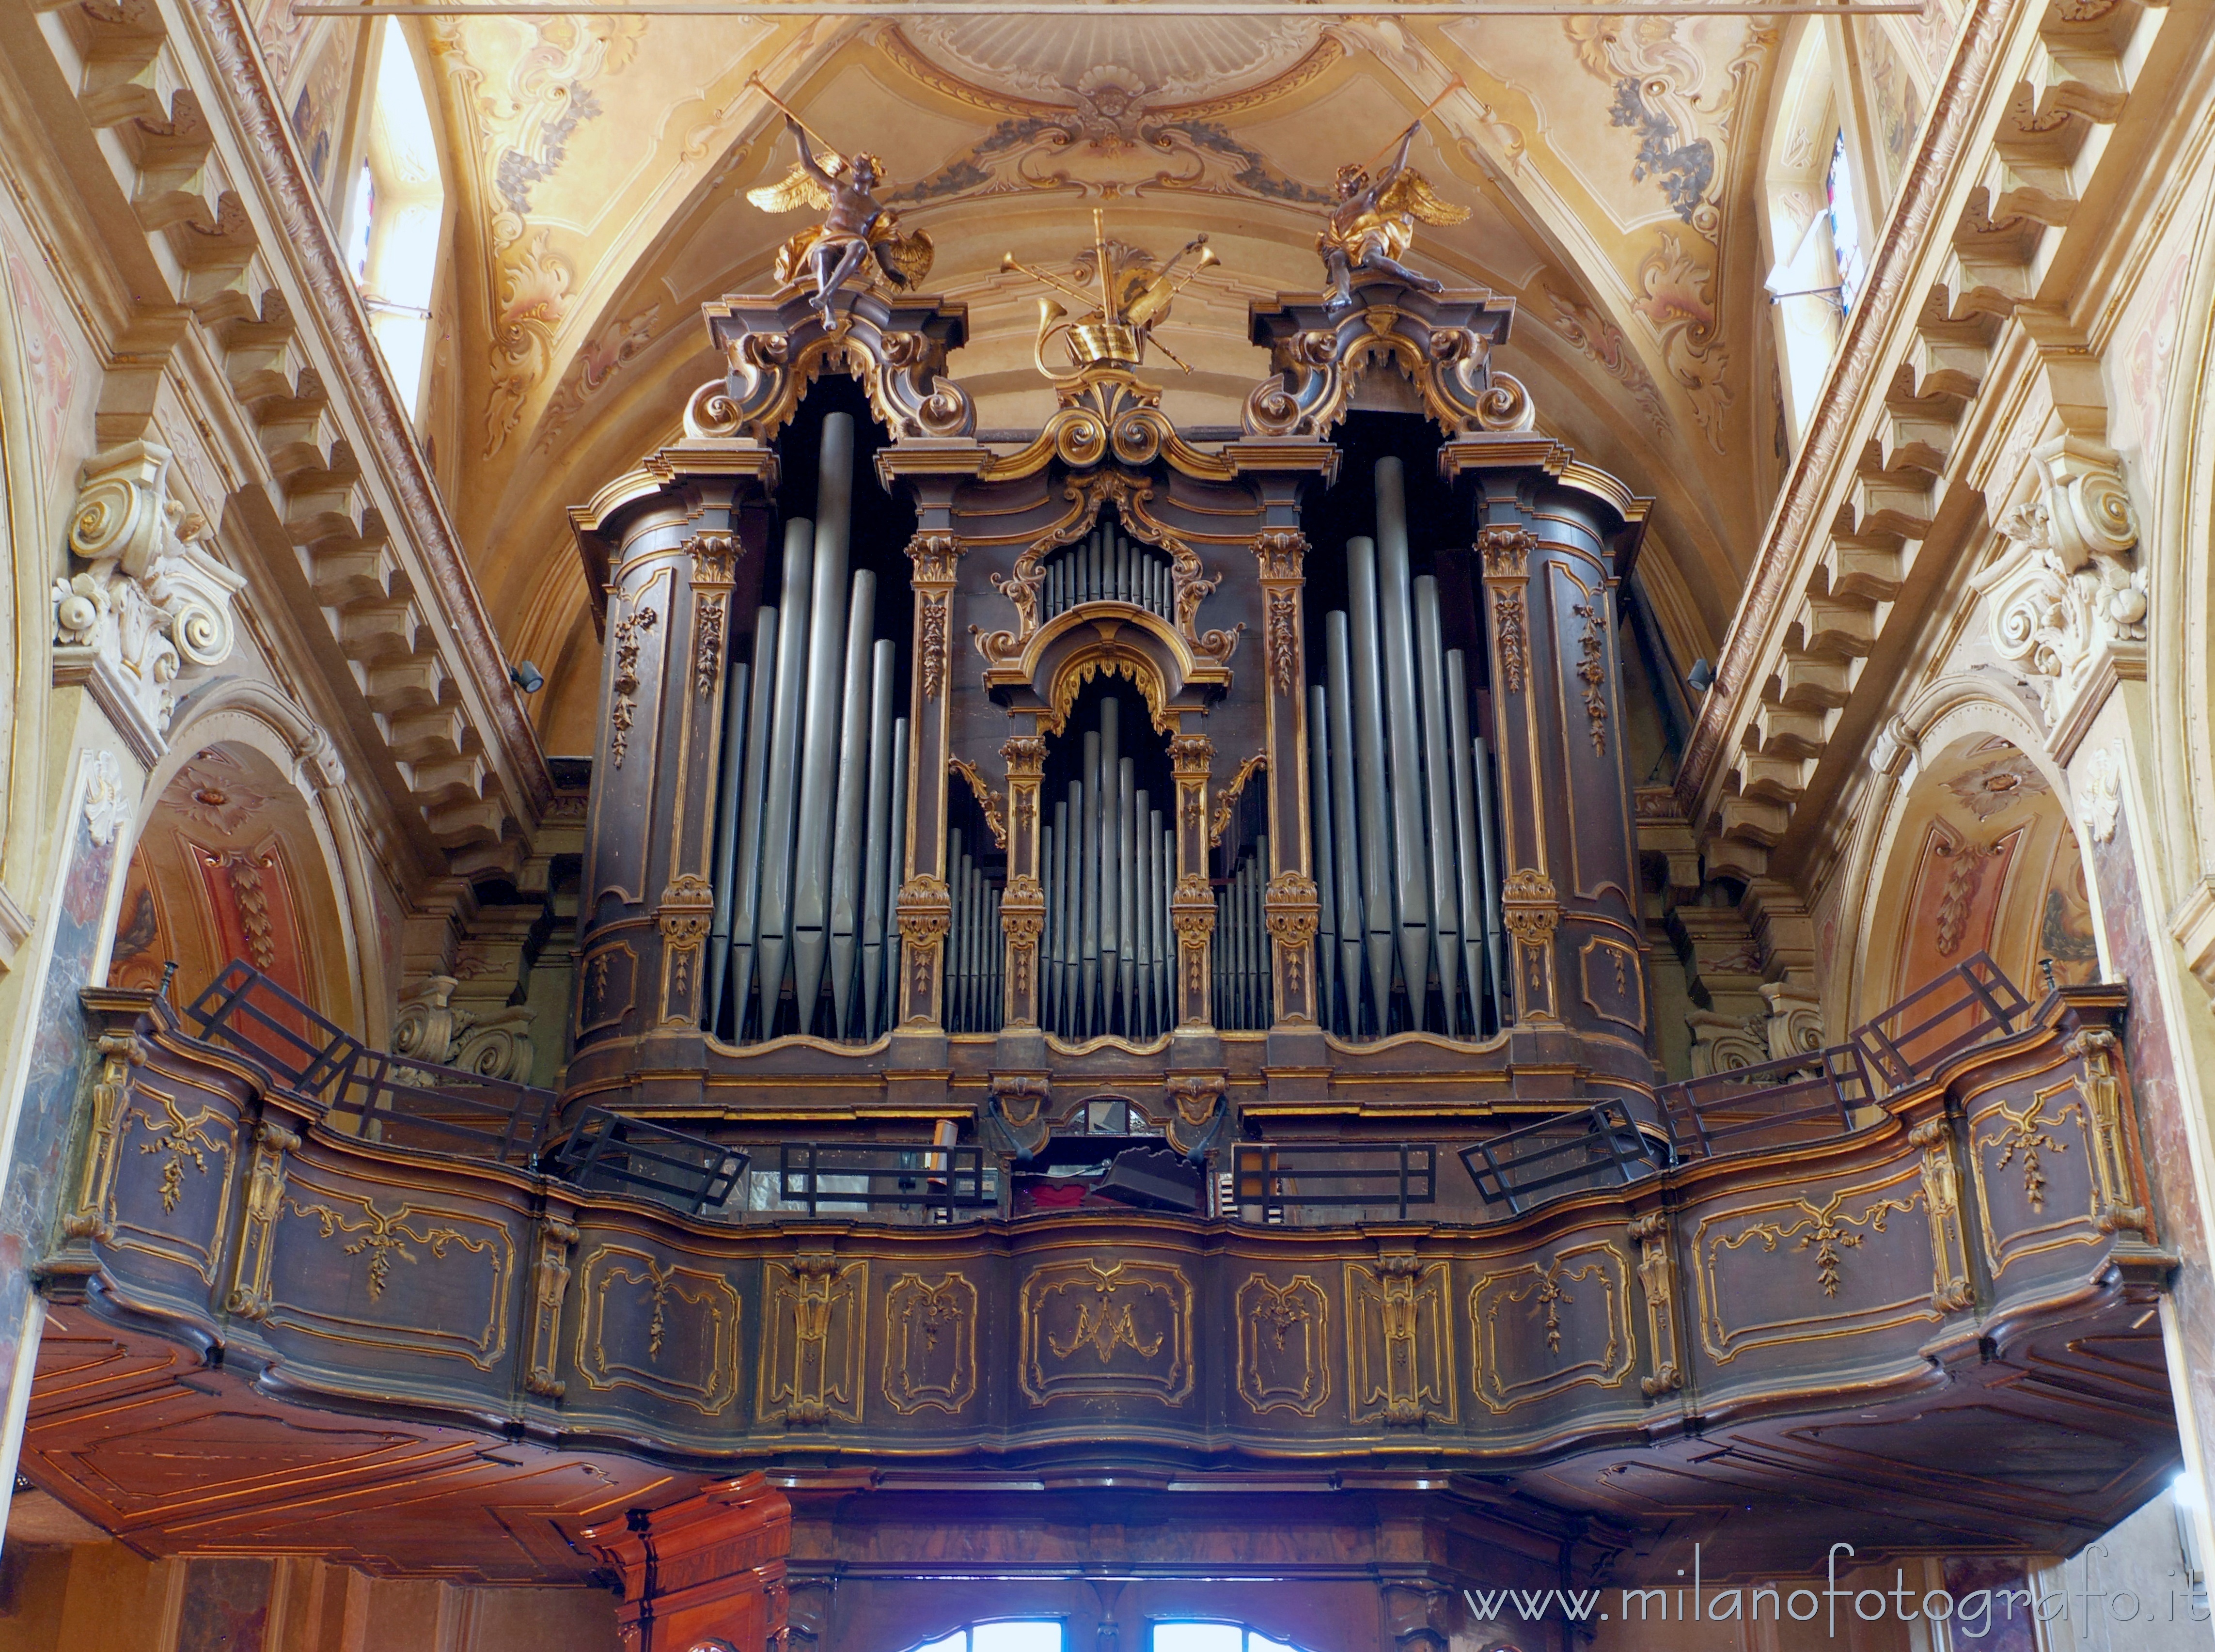 Vimercate (Monza e Brianza, Italy): Organ and cantoria in the Sanctuary of the Blessed Virgin of the Rosary - Vimercate (Monza e Brianza, Italy)